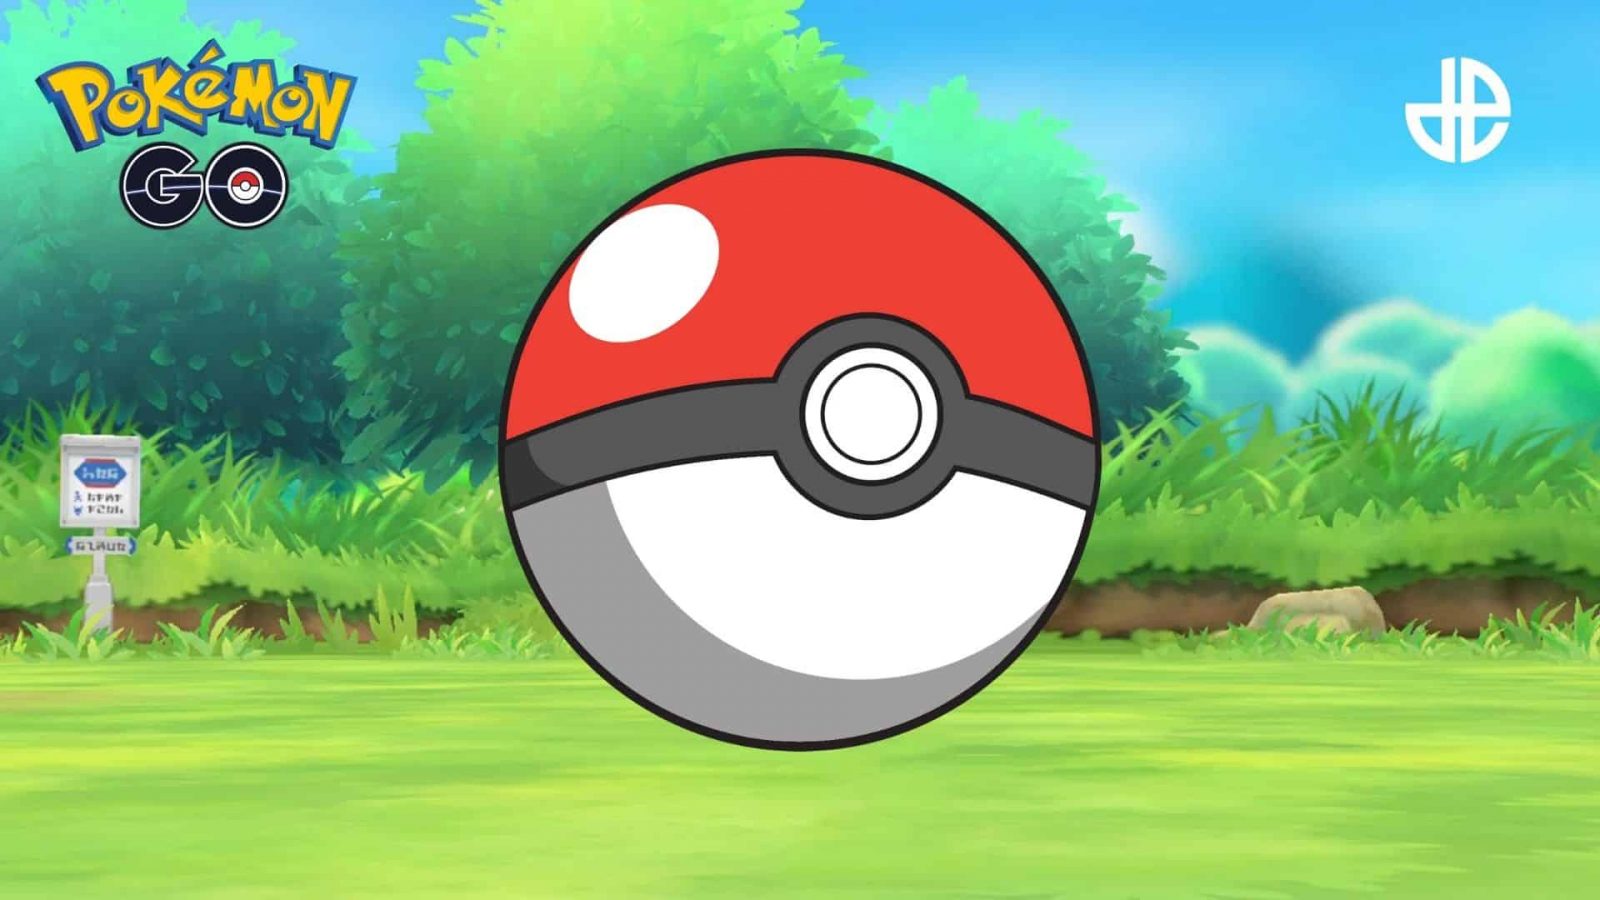 Pokemon Go player reveals free Pokeball trick to help stranded rural players